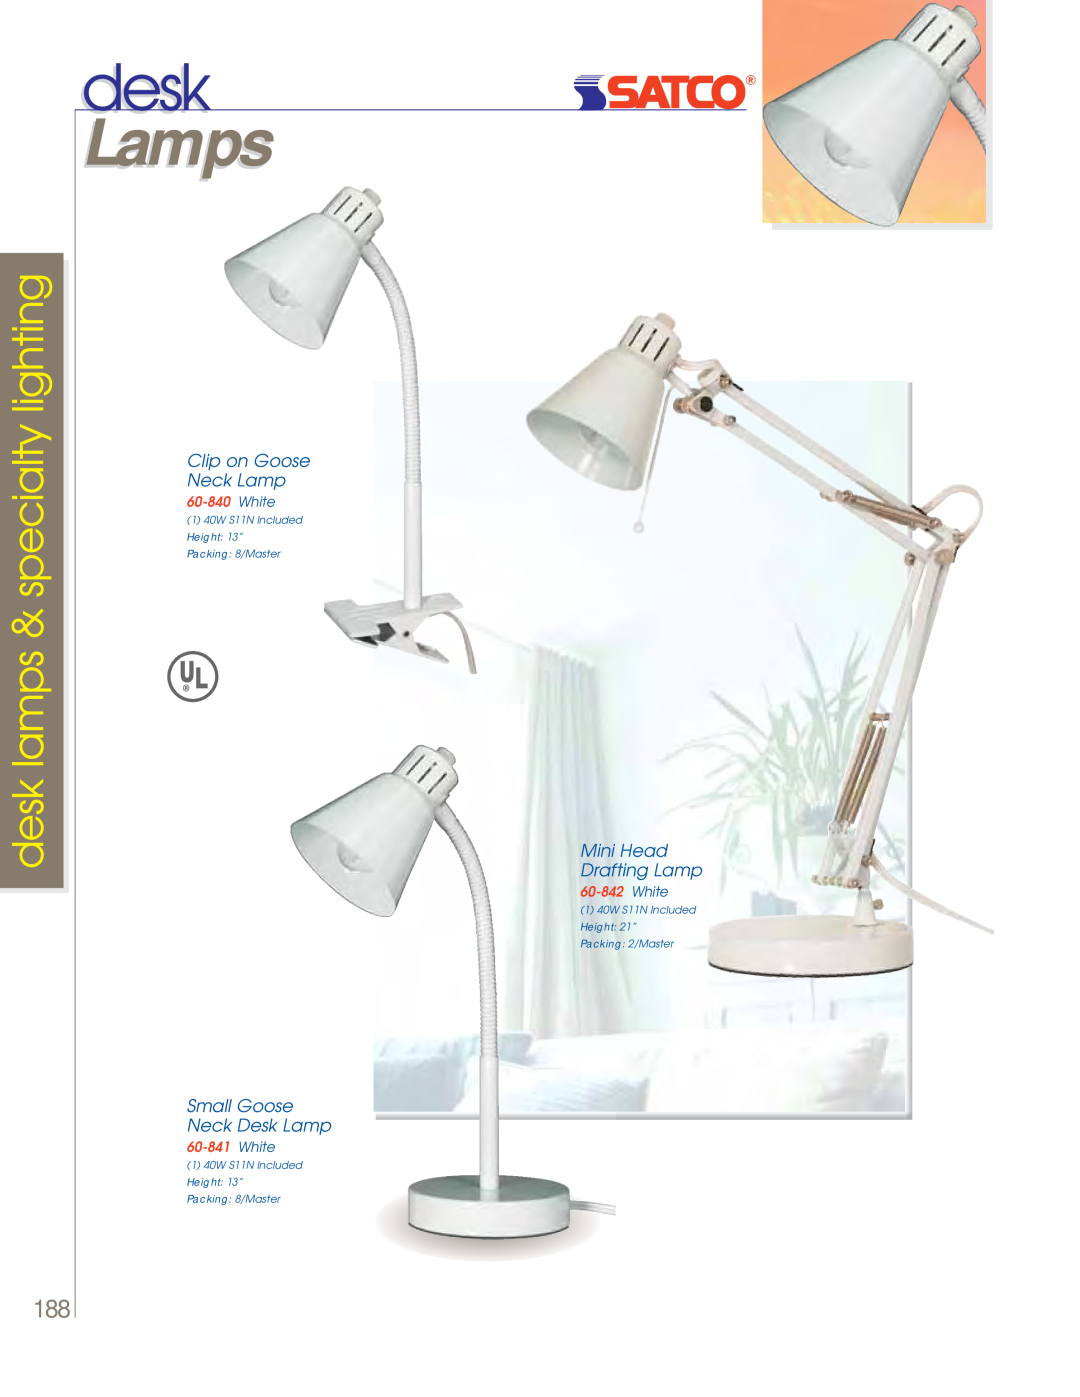 Satco Products 60-801 Lamps, desk lamps & specialty lighting, Clip on Goose Neck Lamp, Small Goose Neck Desk Lamp 